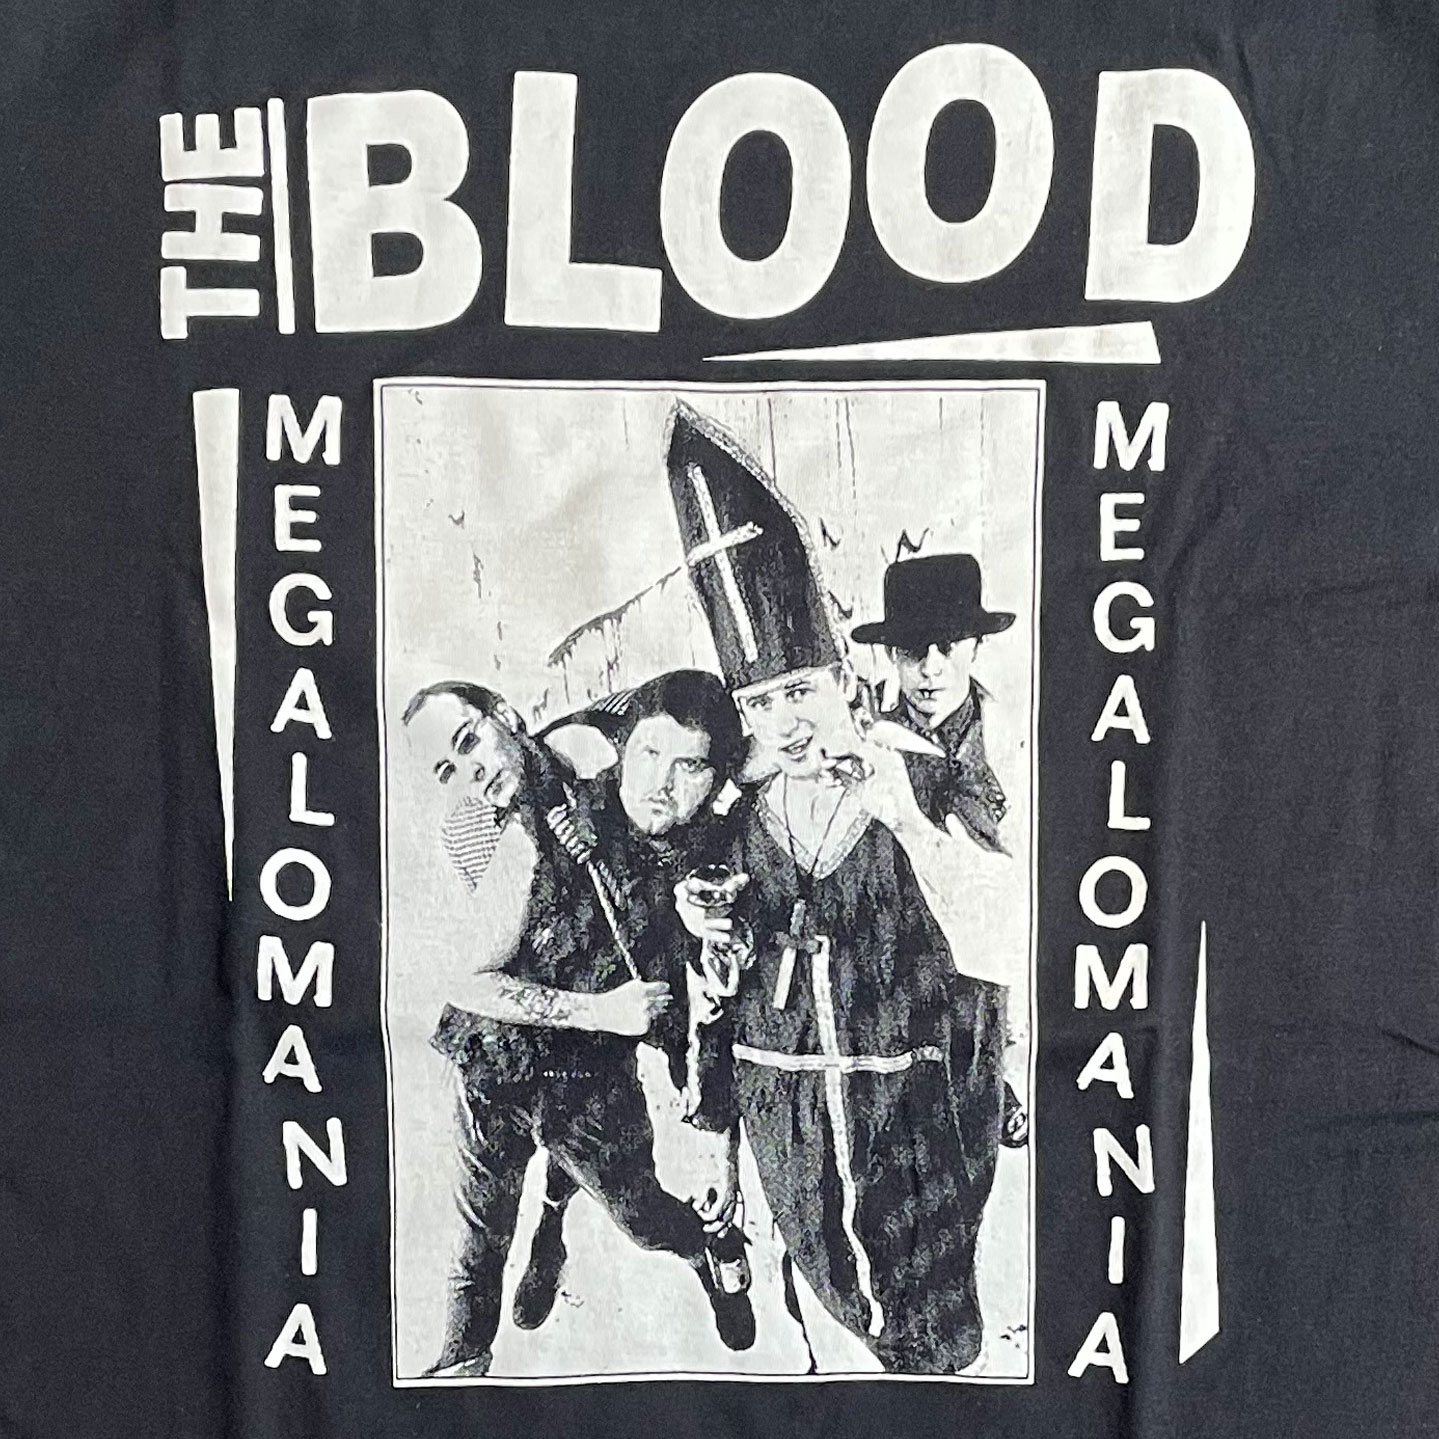 THE BLOOD Tシャツ megalomania2